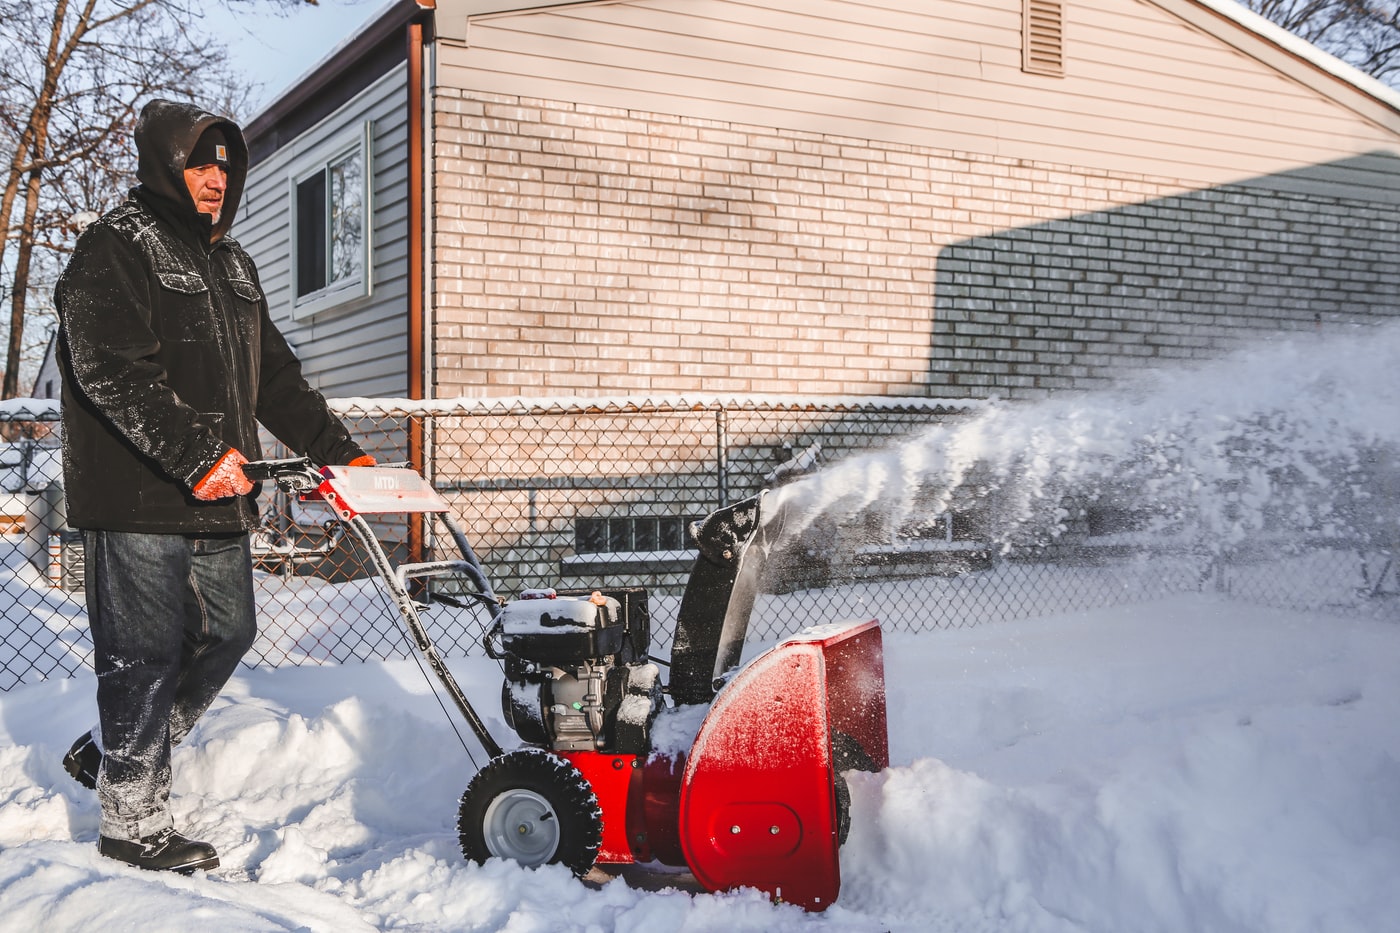 4 Tips For Using A Snow Blower Safely